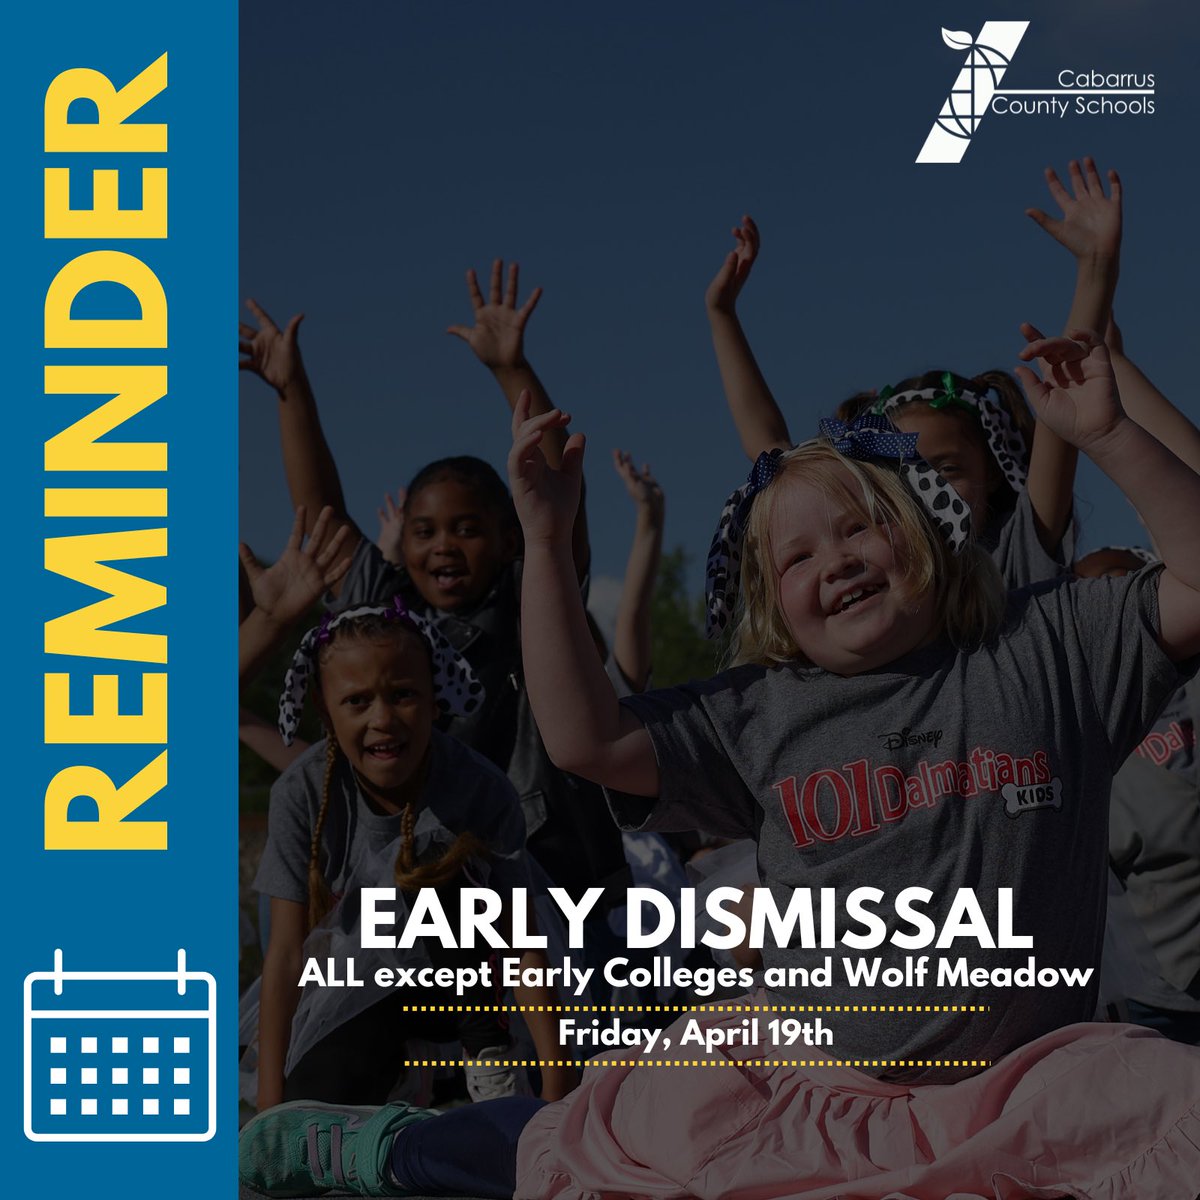 Reminder: Friday, April 19th is an Early dismissal for ALL except Early Colleges and Wolf Meadow. Early dismissal schedule may be viewed here: cabarrus.k12.nc.us/bellschedules